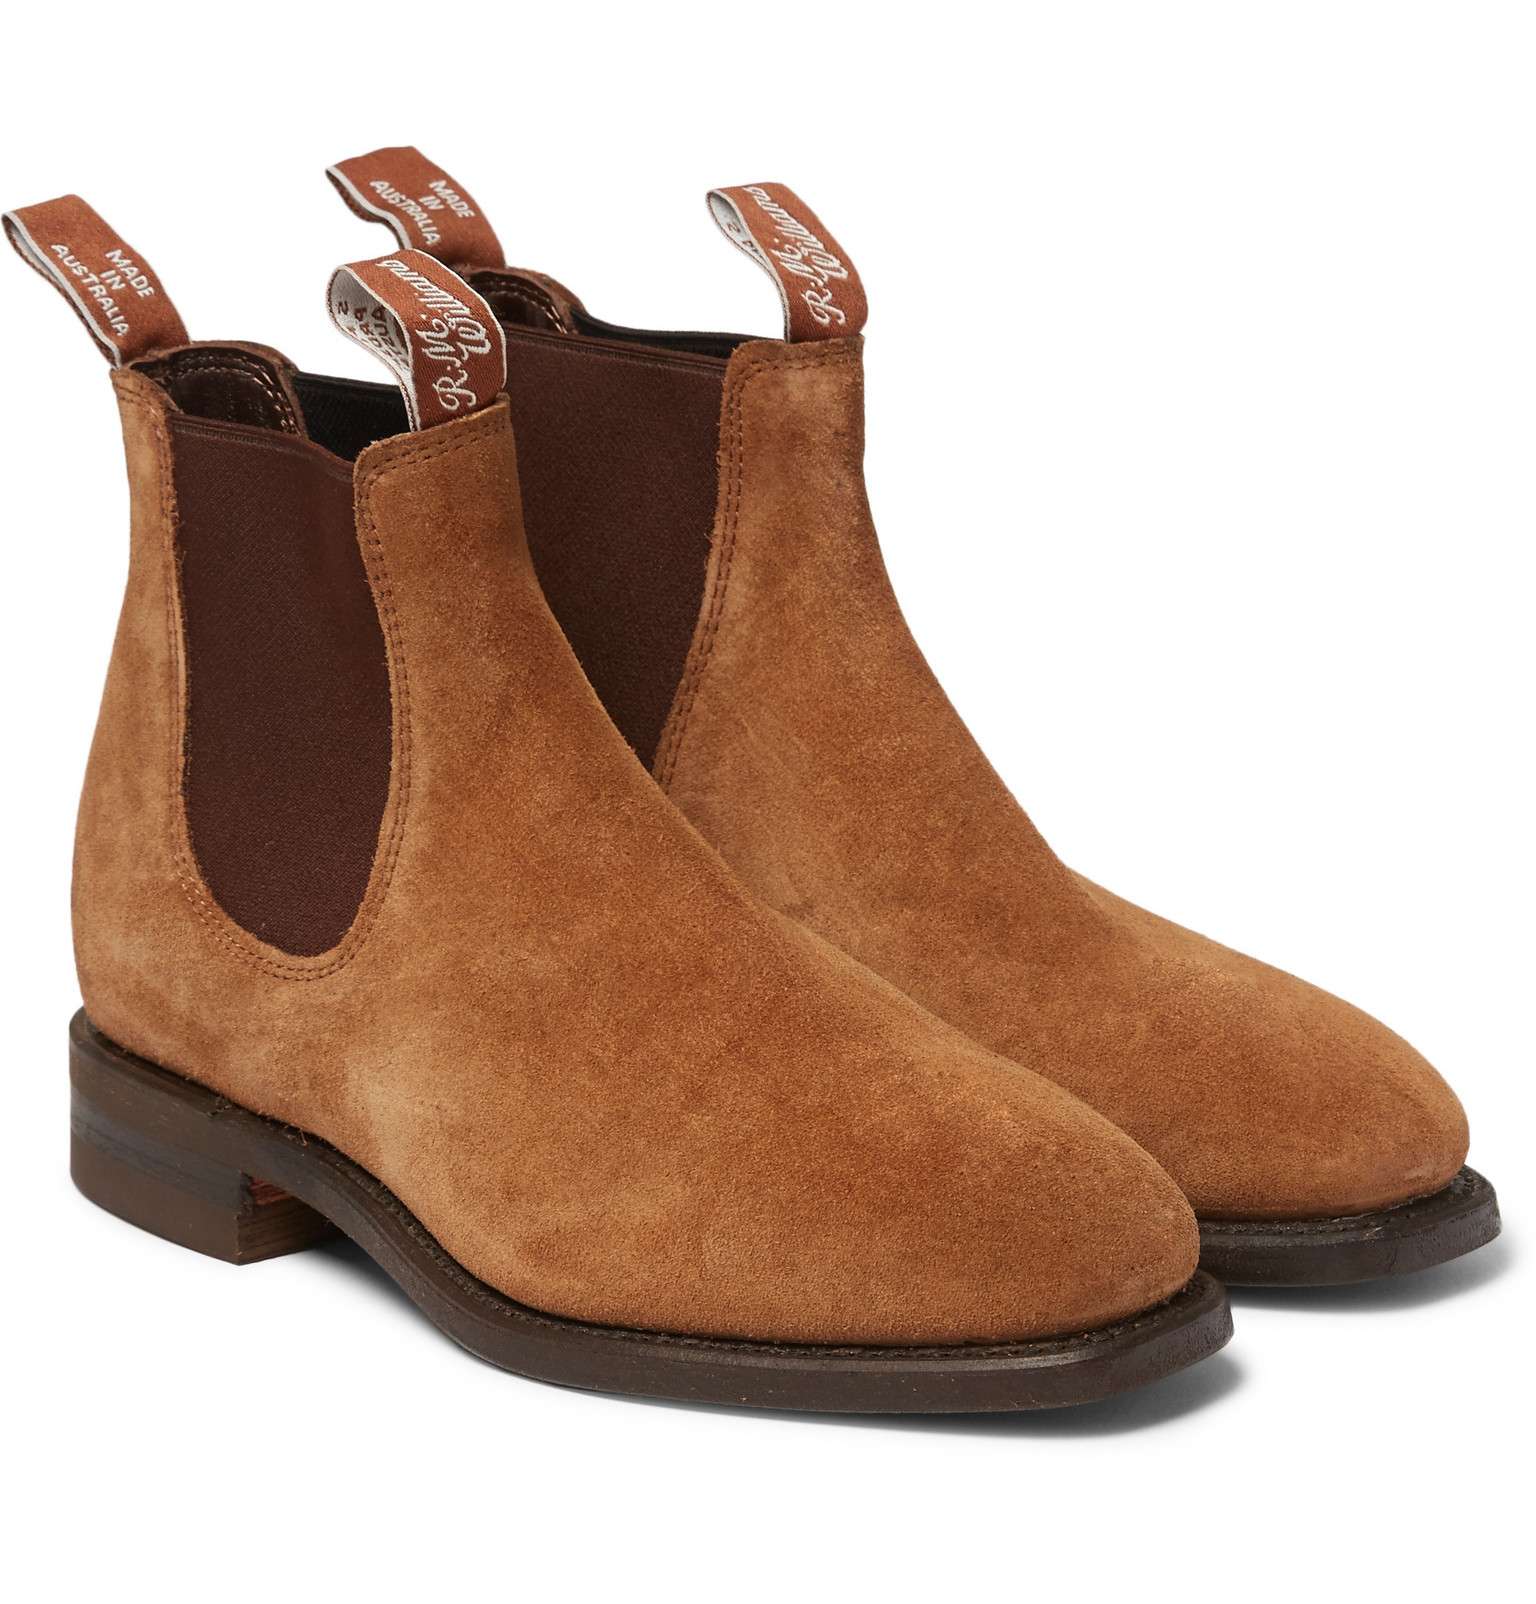 R.M. Williams Suede Chelsea Boots in Brown for Men